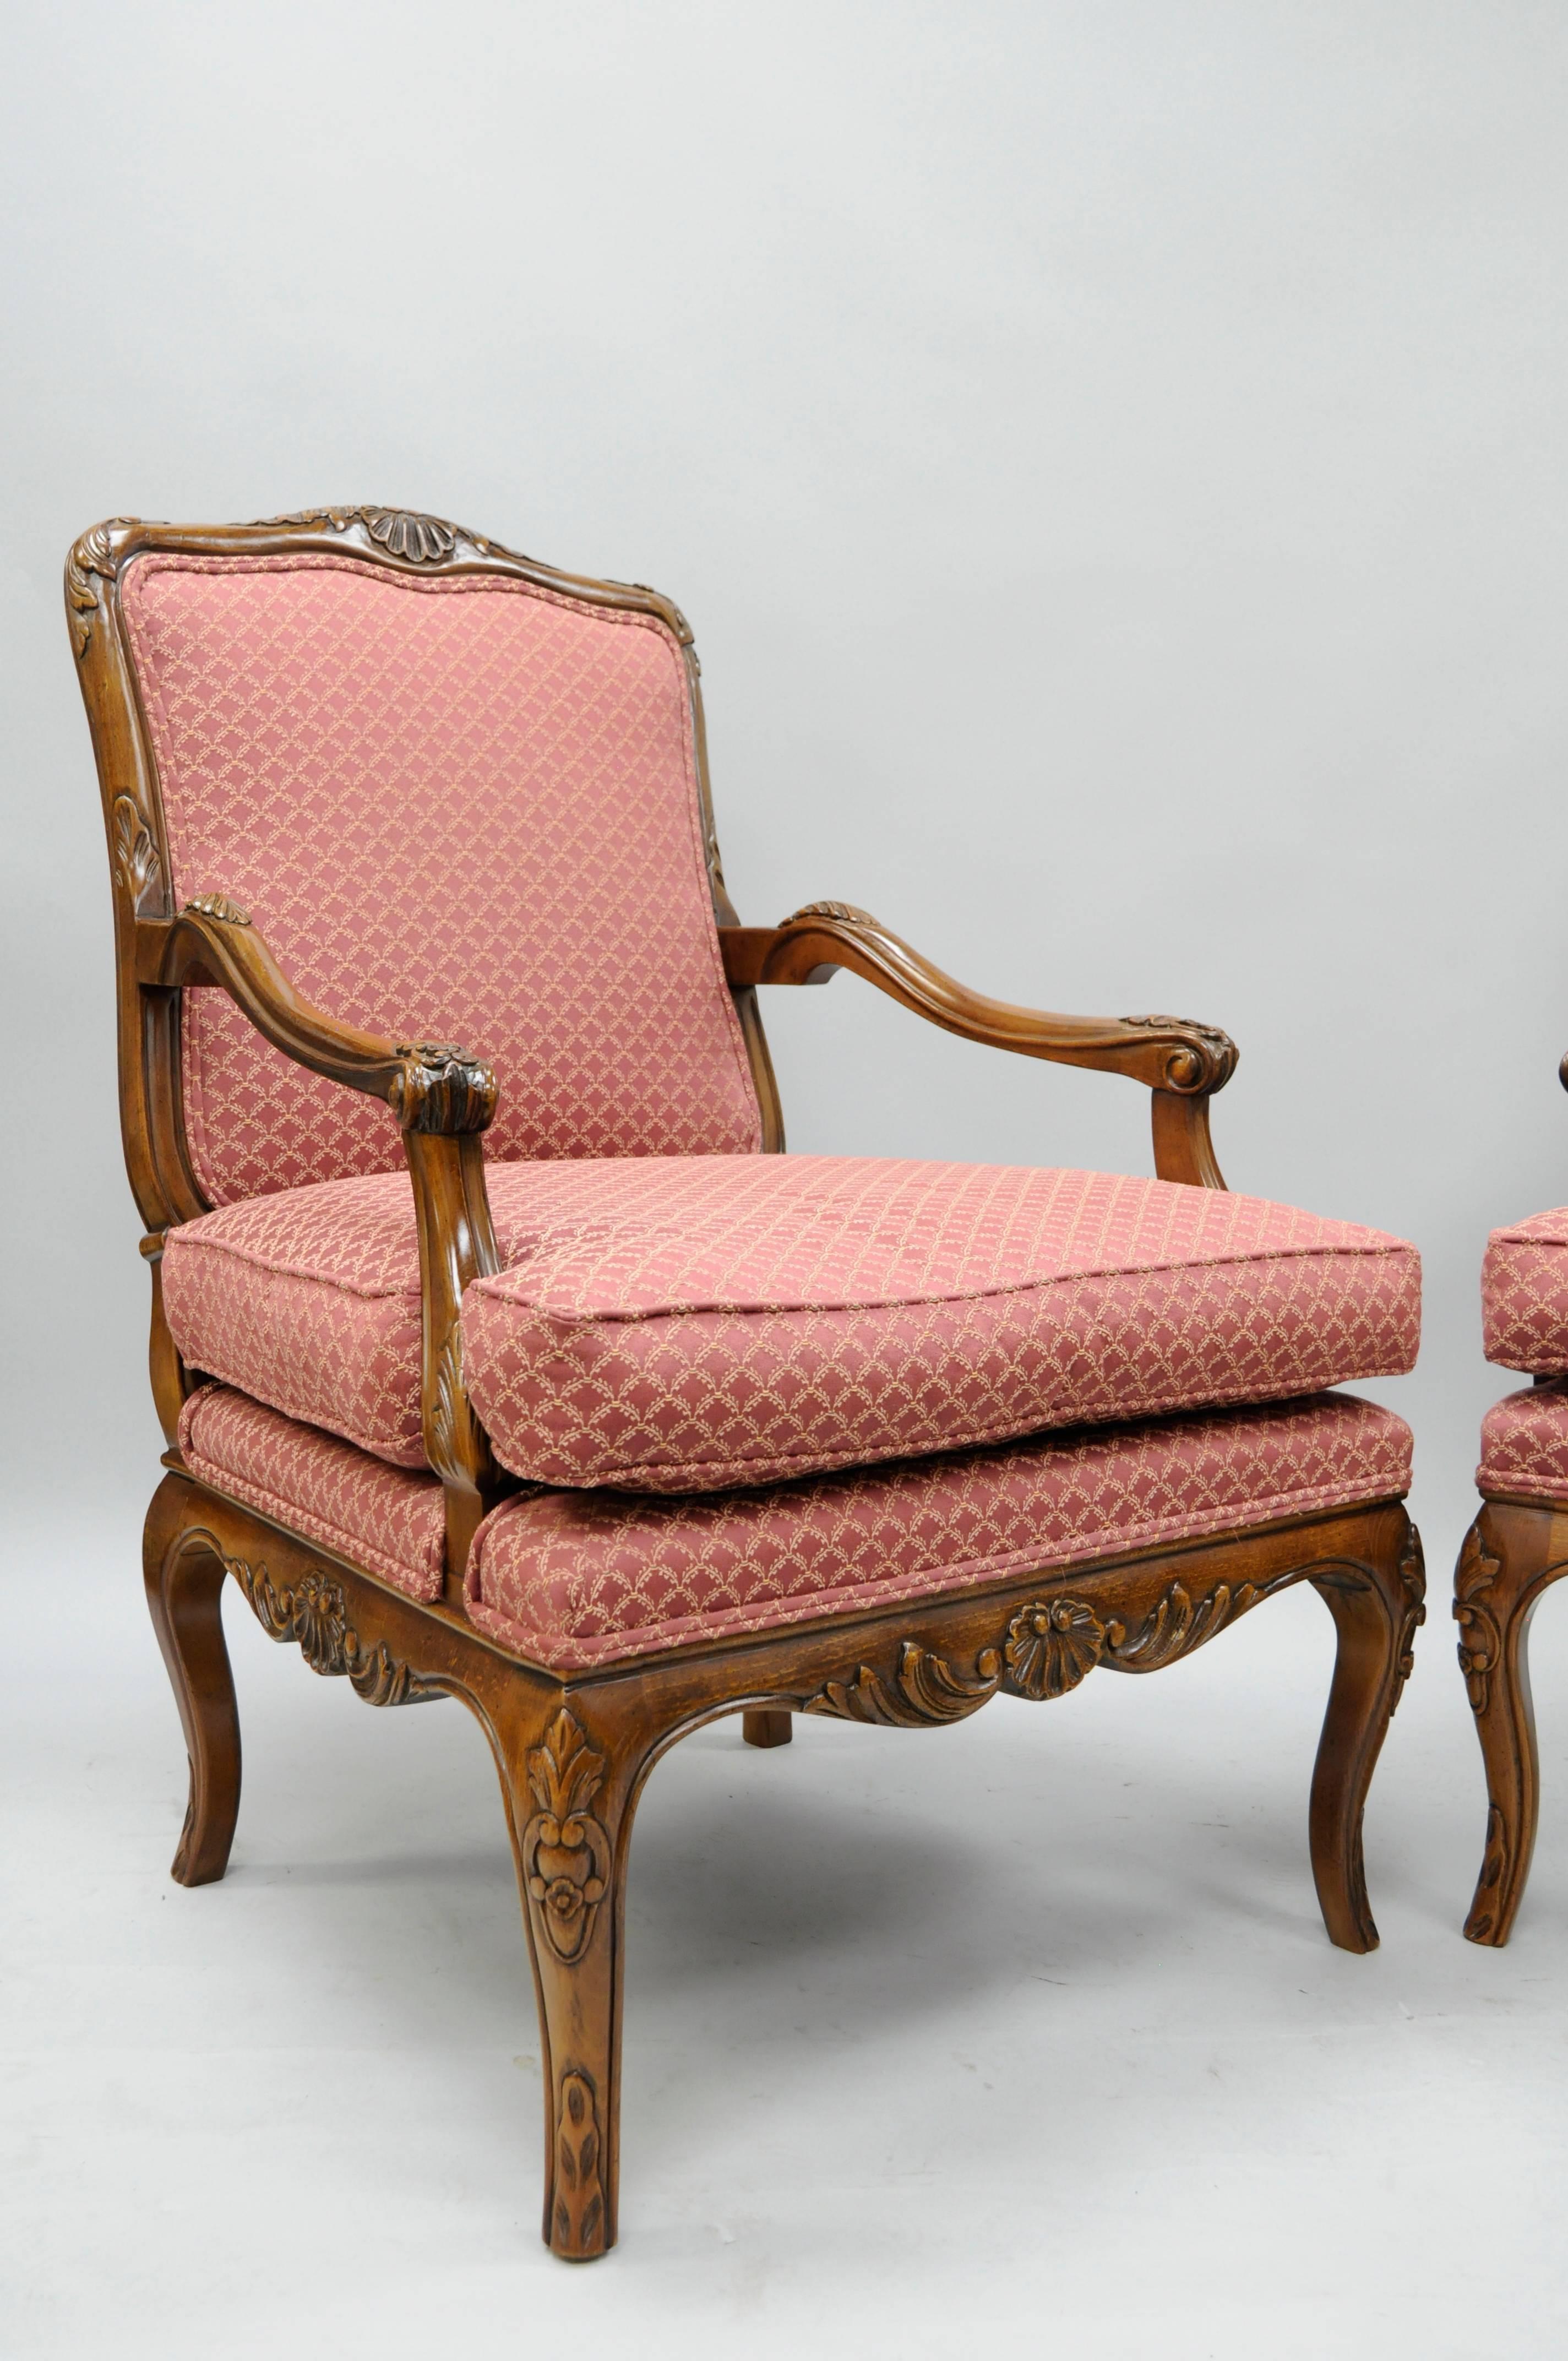 Pair of 20th century, high quality, country French / Louis XV style shell carved living room lounge chairs by Century Chair Company. The pair features solid carved wood frames, deep comfortable seats, finely carved skirts with shell and floral